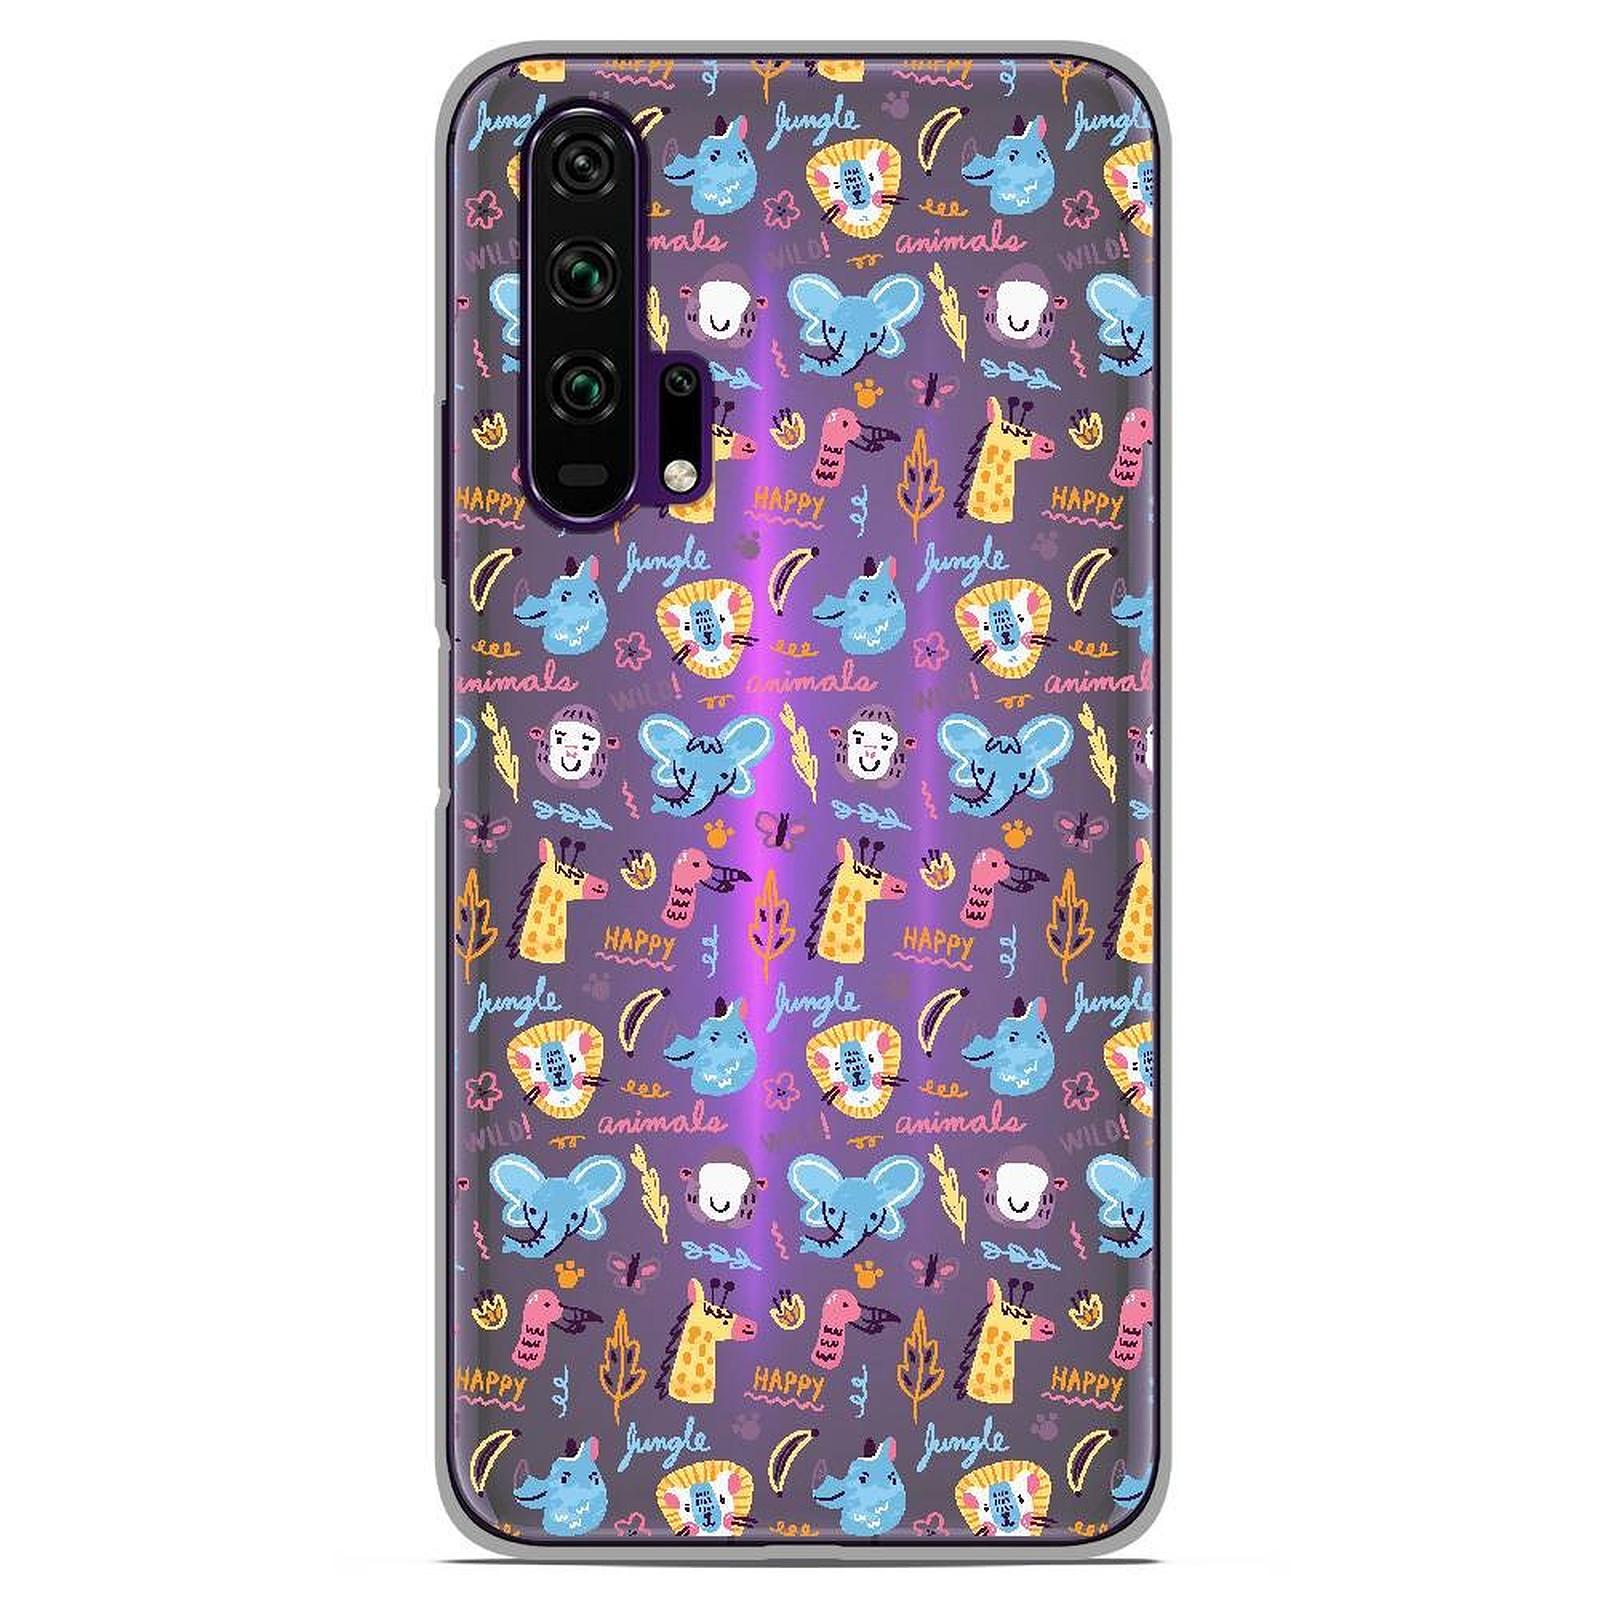 1001 Coques Coque silicone gel Huawei Honor 20 Pro motif Happy animals - Coque telephone 1001Coques